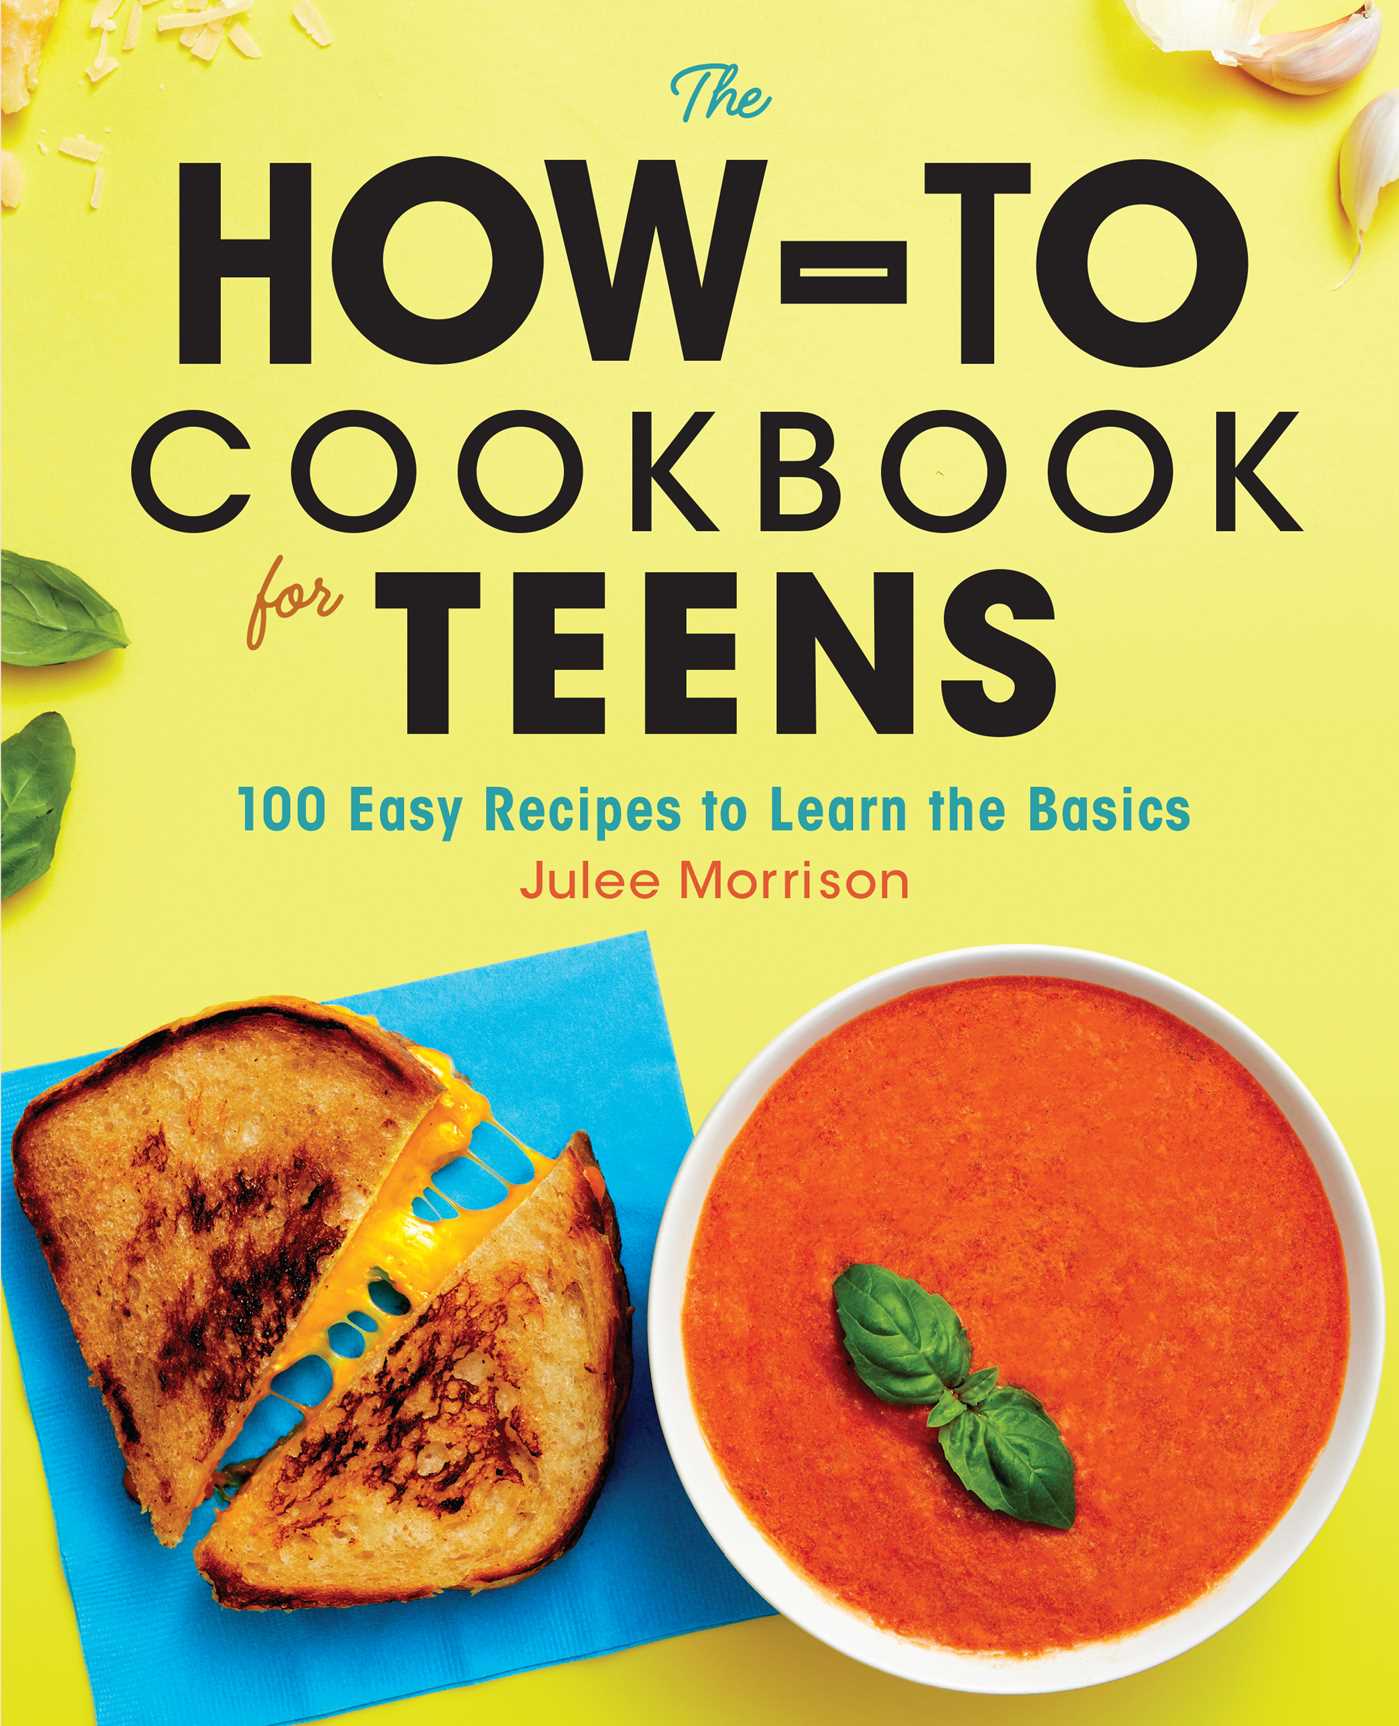 The How-To Cookbook for Teens : 100 Easy Recipes to Learn the Basics (Paperback) - image 1 of 1